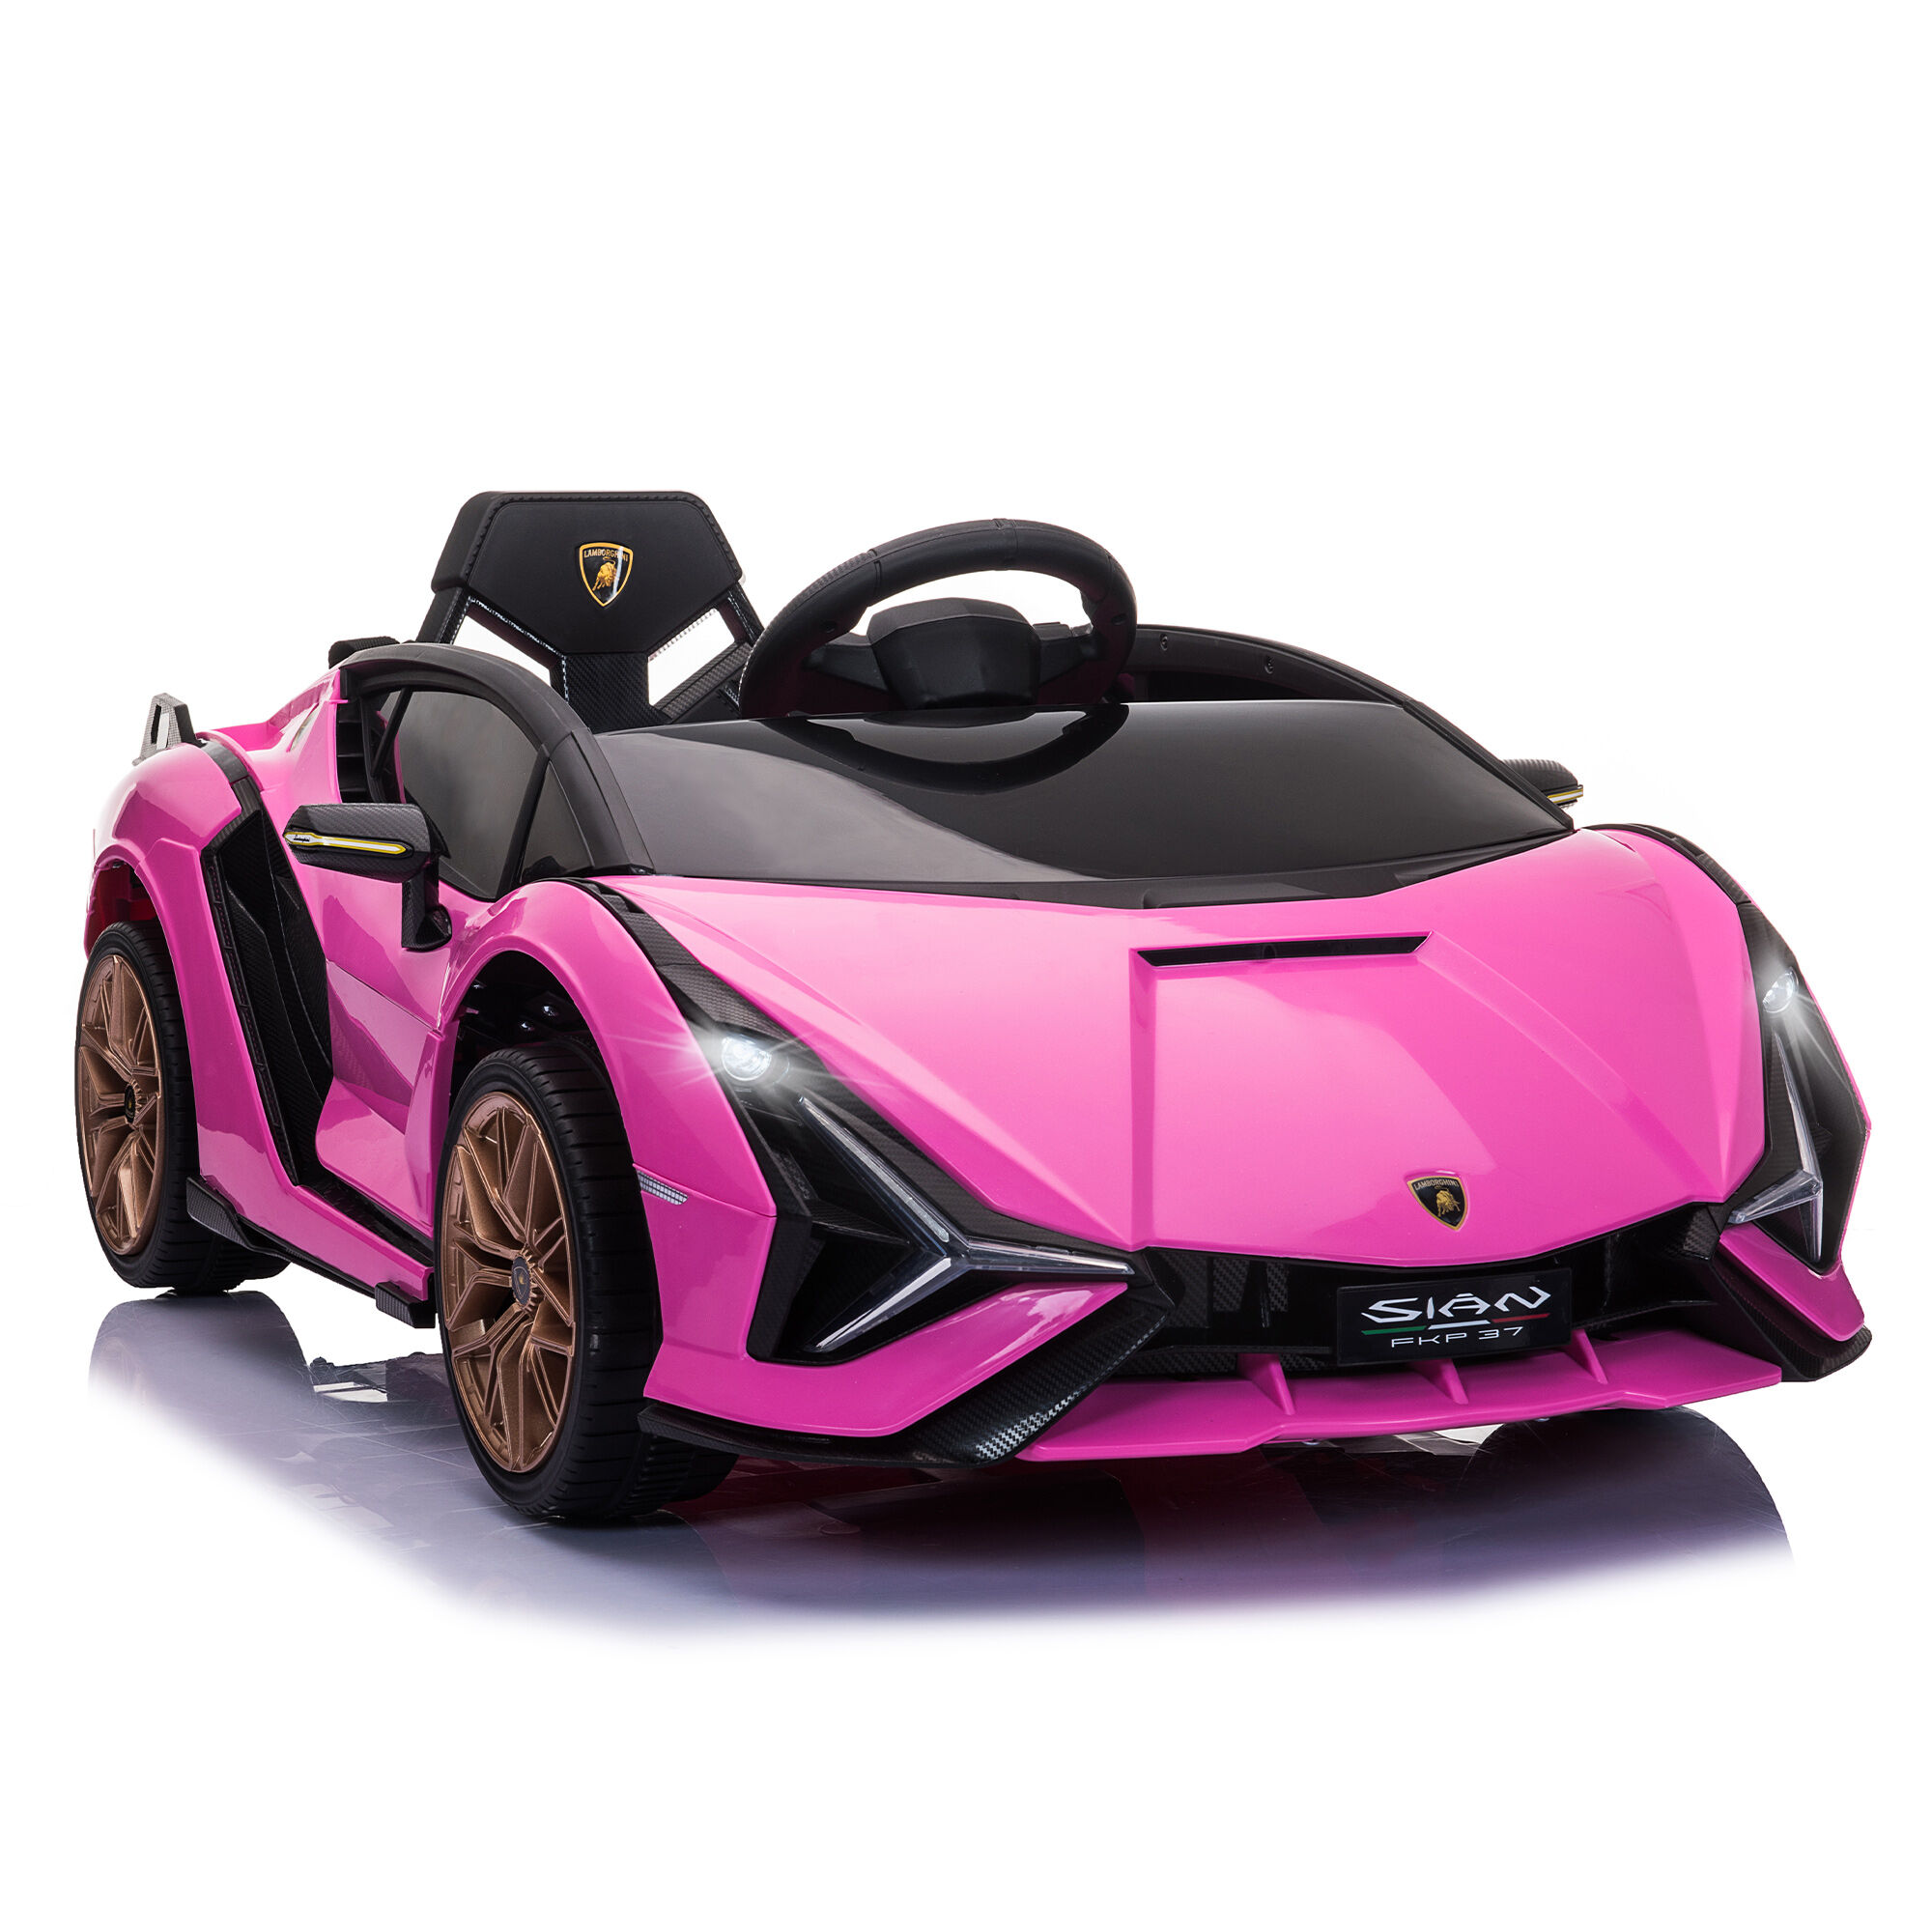 Aosom Lamborghini Licensed Kids Ride On Car - 12V, Battery-Powered, Electric Sports Toy, Remote Control, Horn & Music, Pink, Ages 3-5   Aosom.com